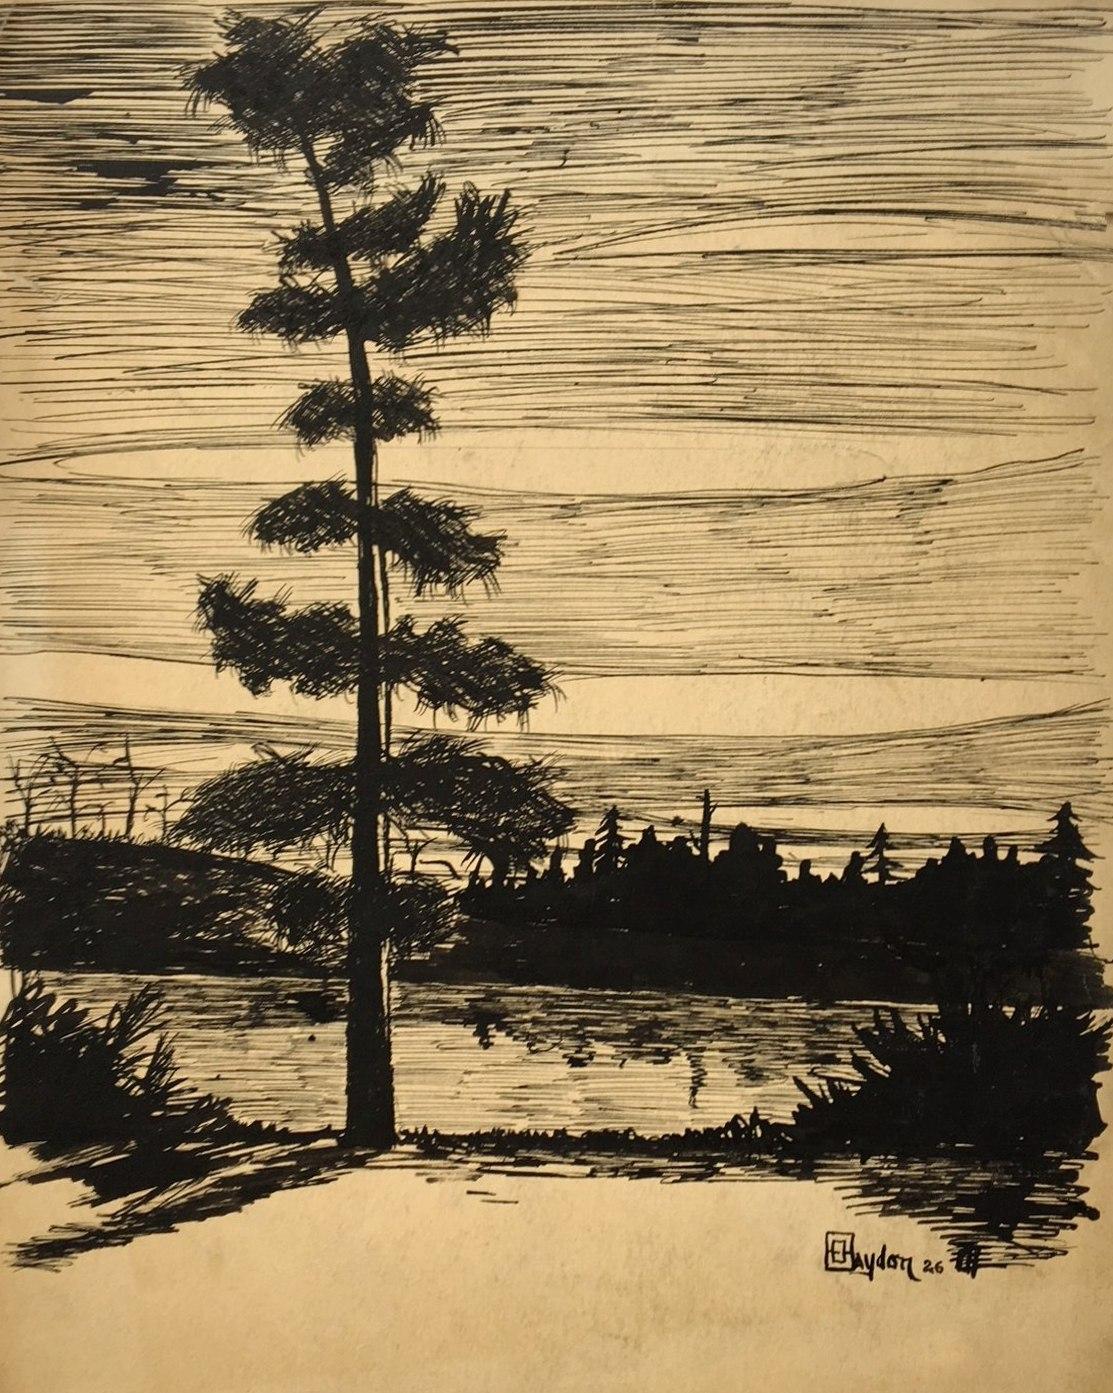 A 1926 ink on paper drawing of a Cedar tree and northern lake by artist Harold Haydon.  

Harold Emerson Haydon was born in Fort William, Ontario, Canada in 1909.   Haydon came to Chicago with his family in 1917 and became a naturalized American